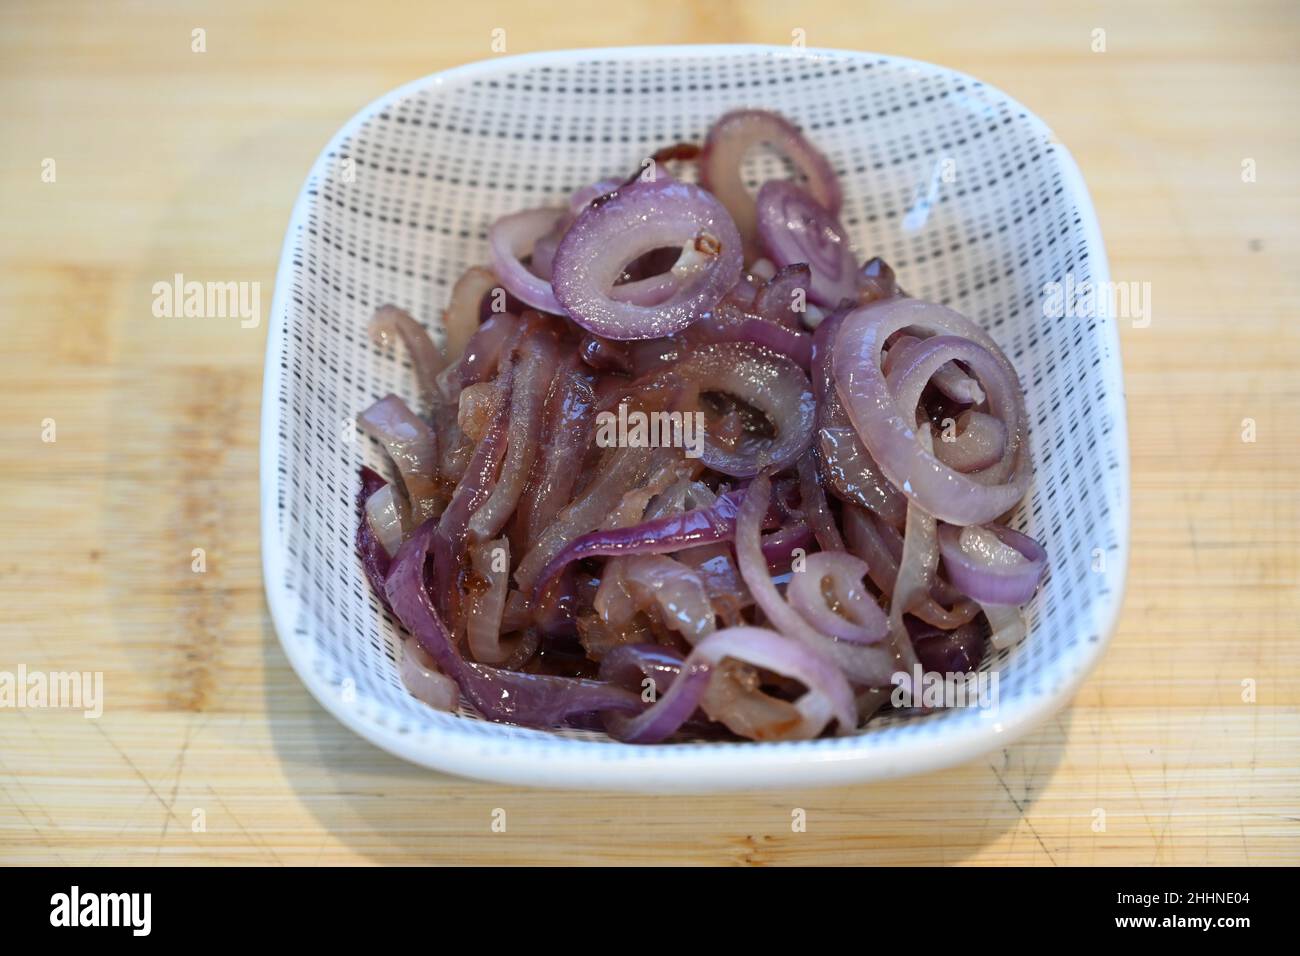 slow fried caramelised red onions, cooking ingredients, food preparation Stock Photo